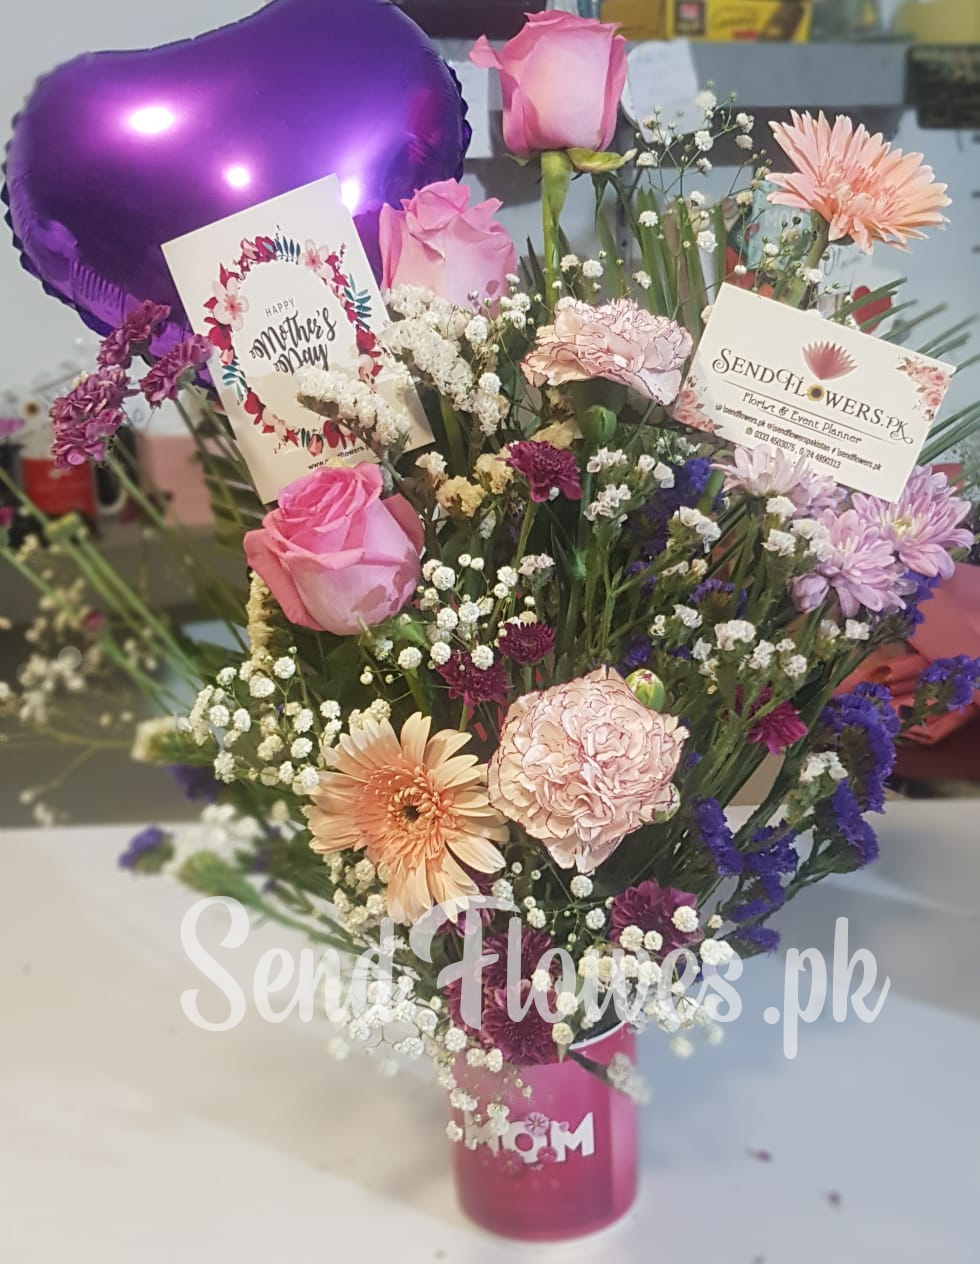 mother's day deals, flowers & gift delivery services in Pakistan